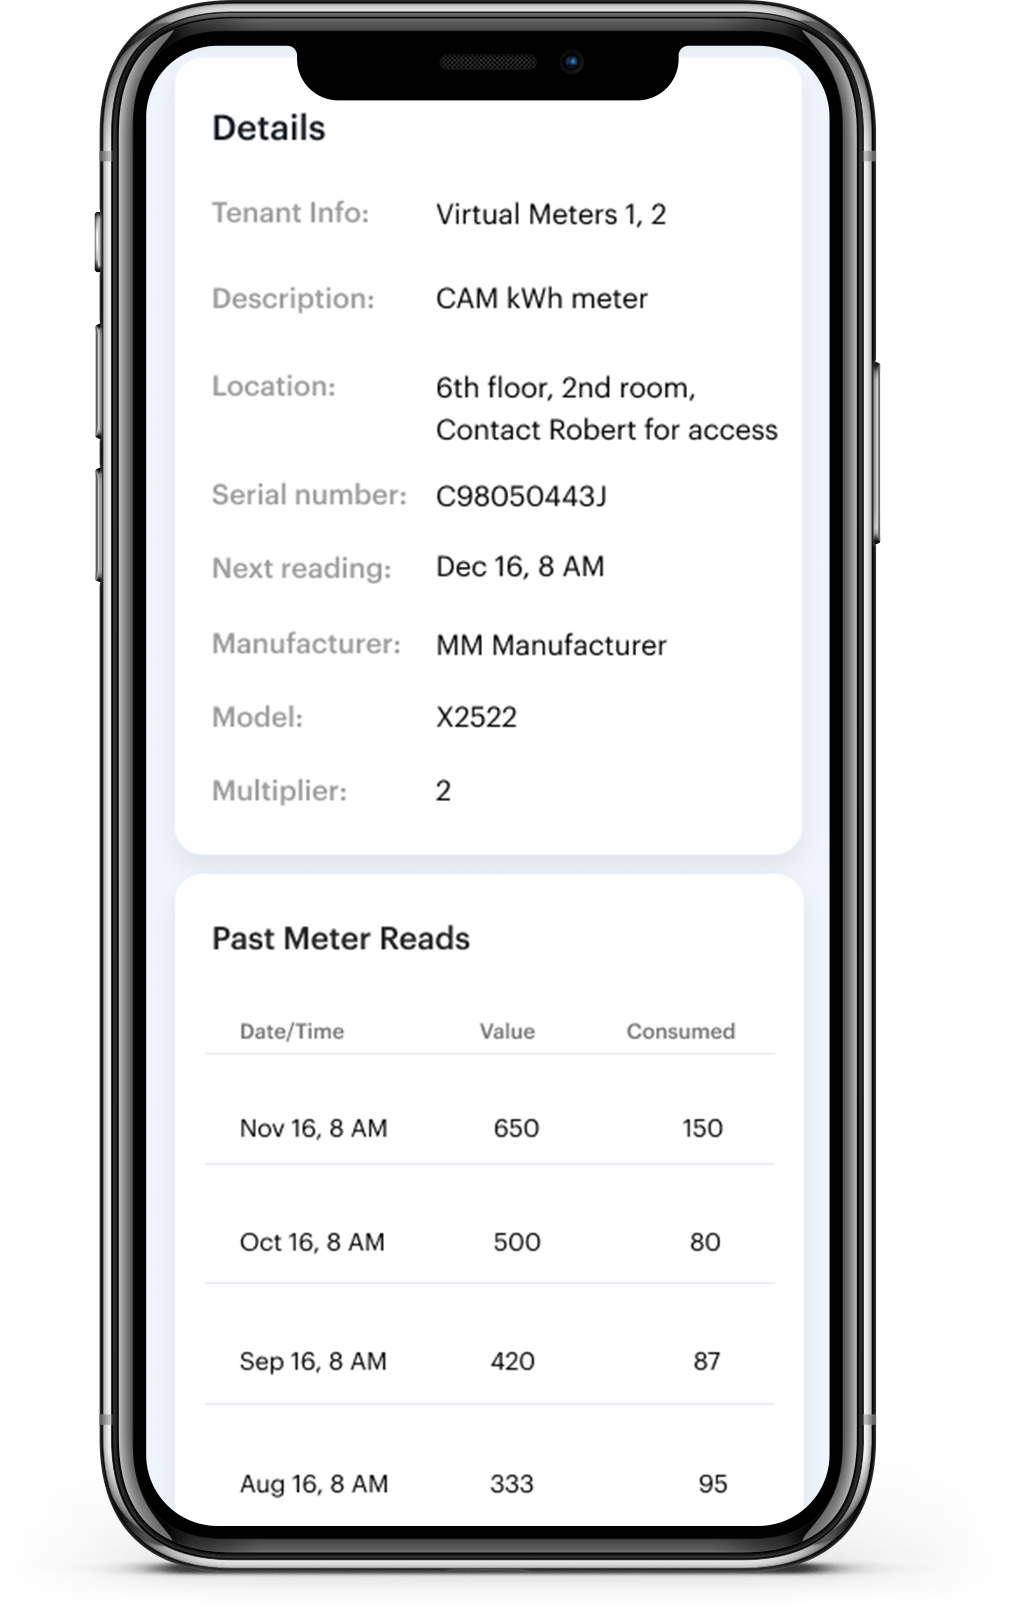 Comprehensive meter information and historical meter reads all accessible from the mobile app.